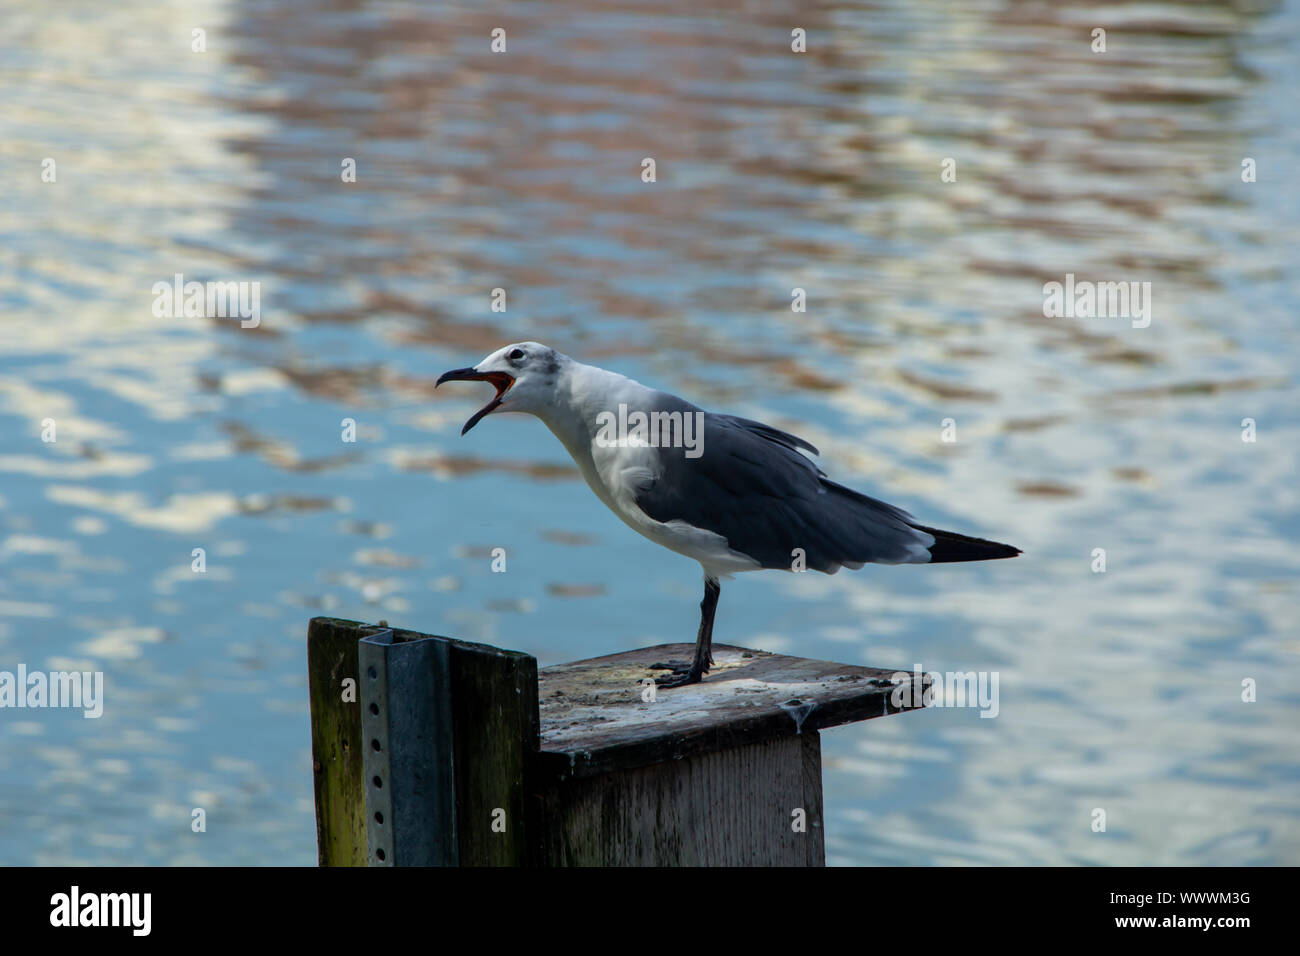 A Seagull is yelling unhappily by the lake Stock Photo